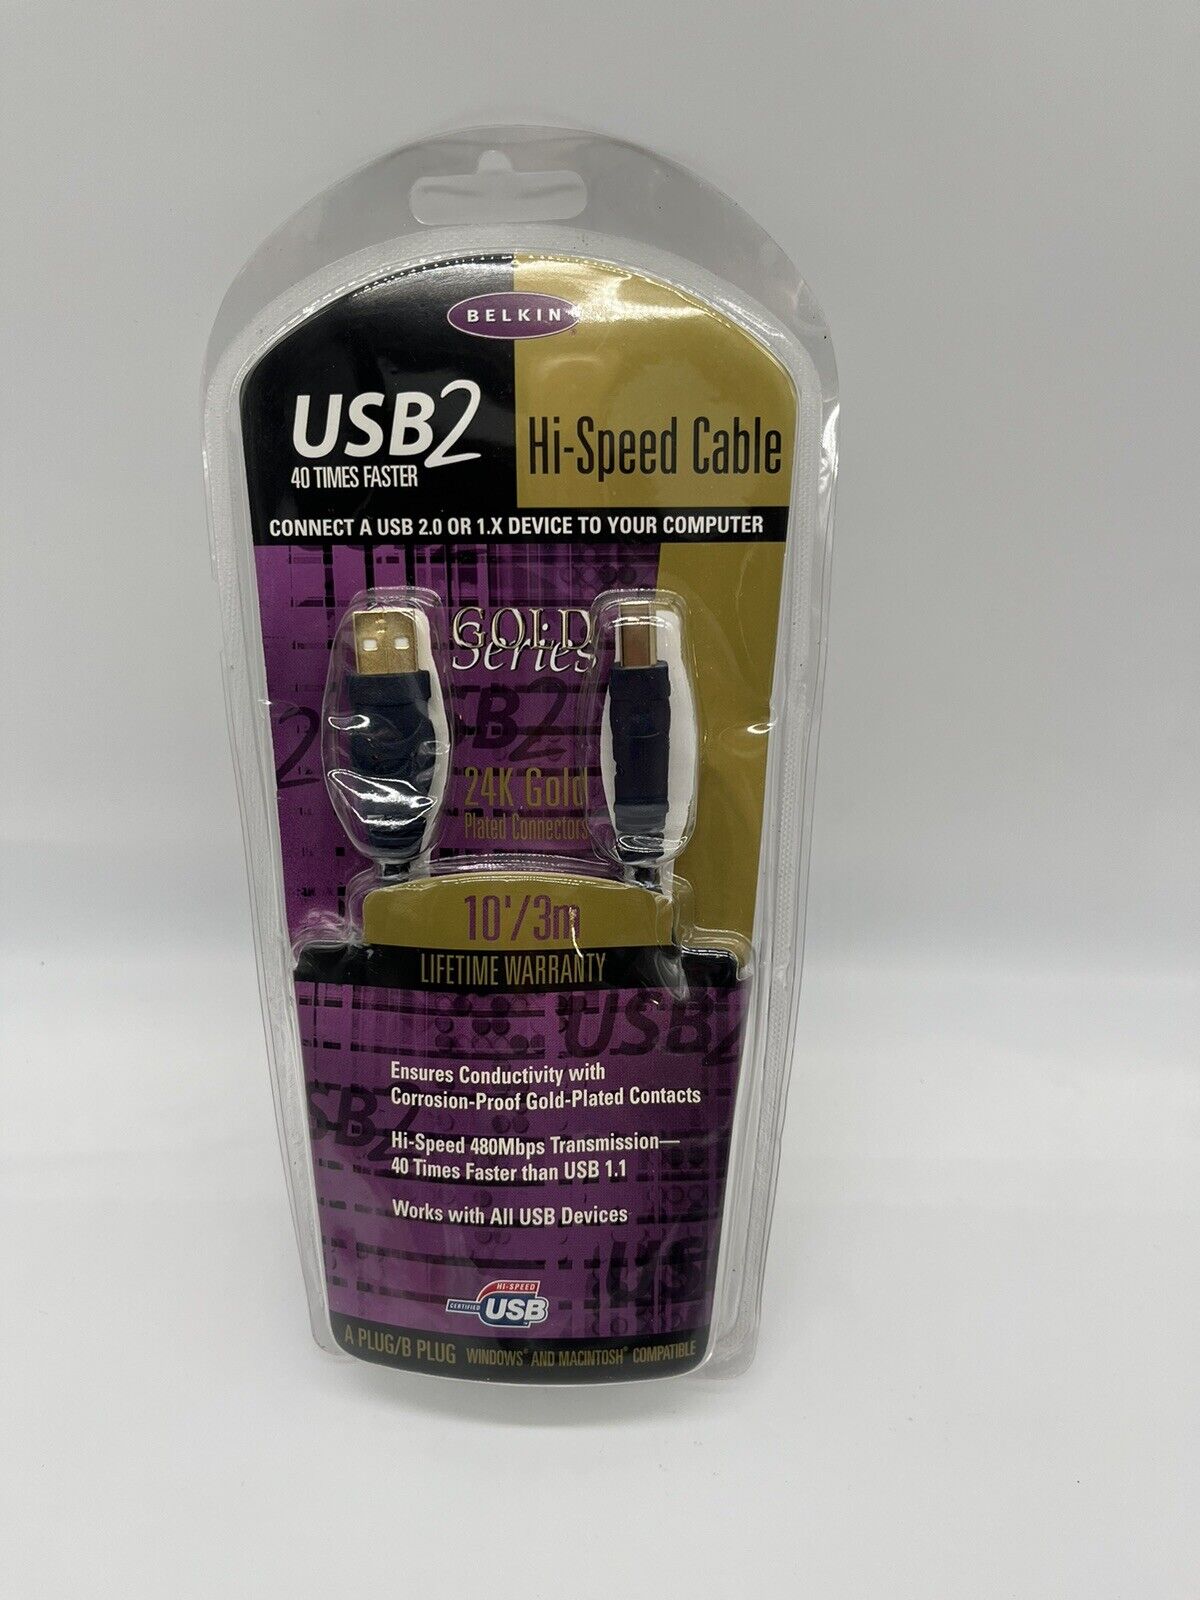 New Belkin Gold Series High-Speed USB 2.0 Cable, 6ft. Black